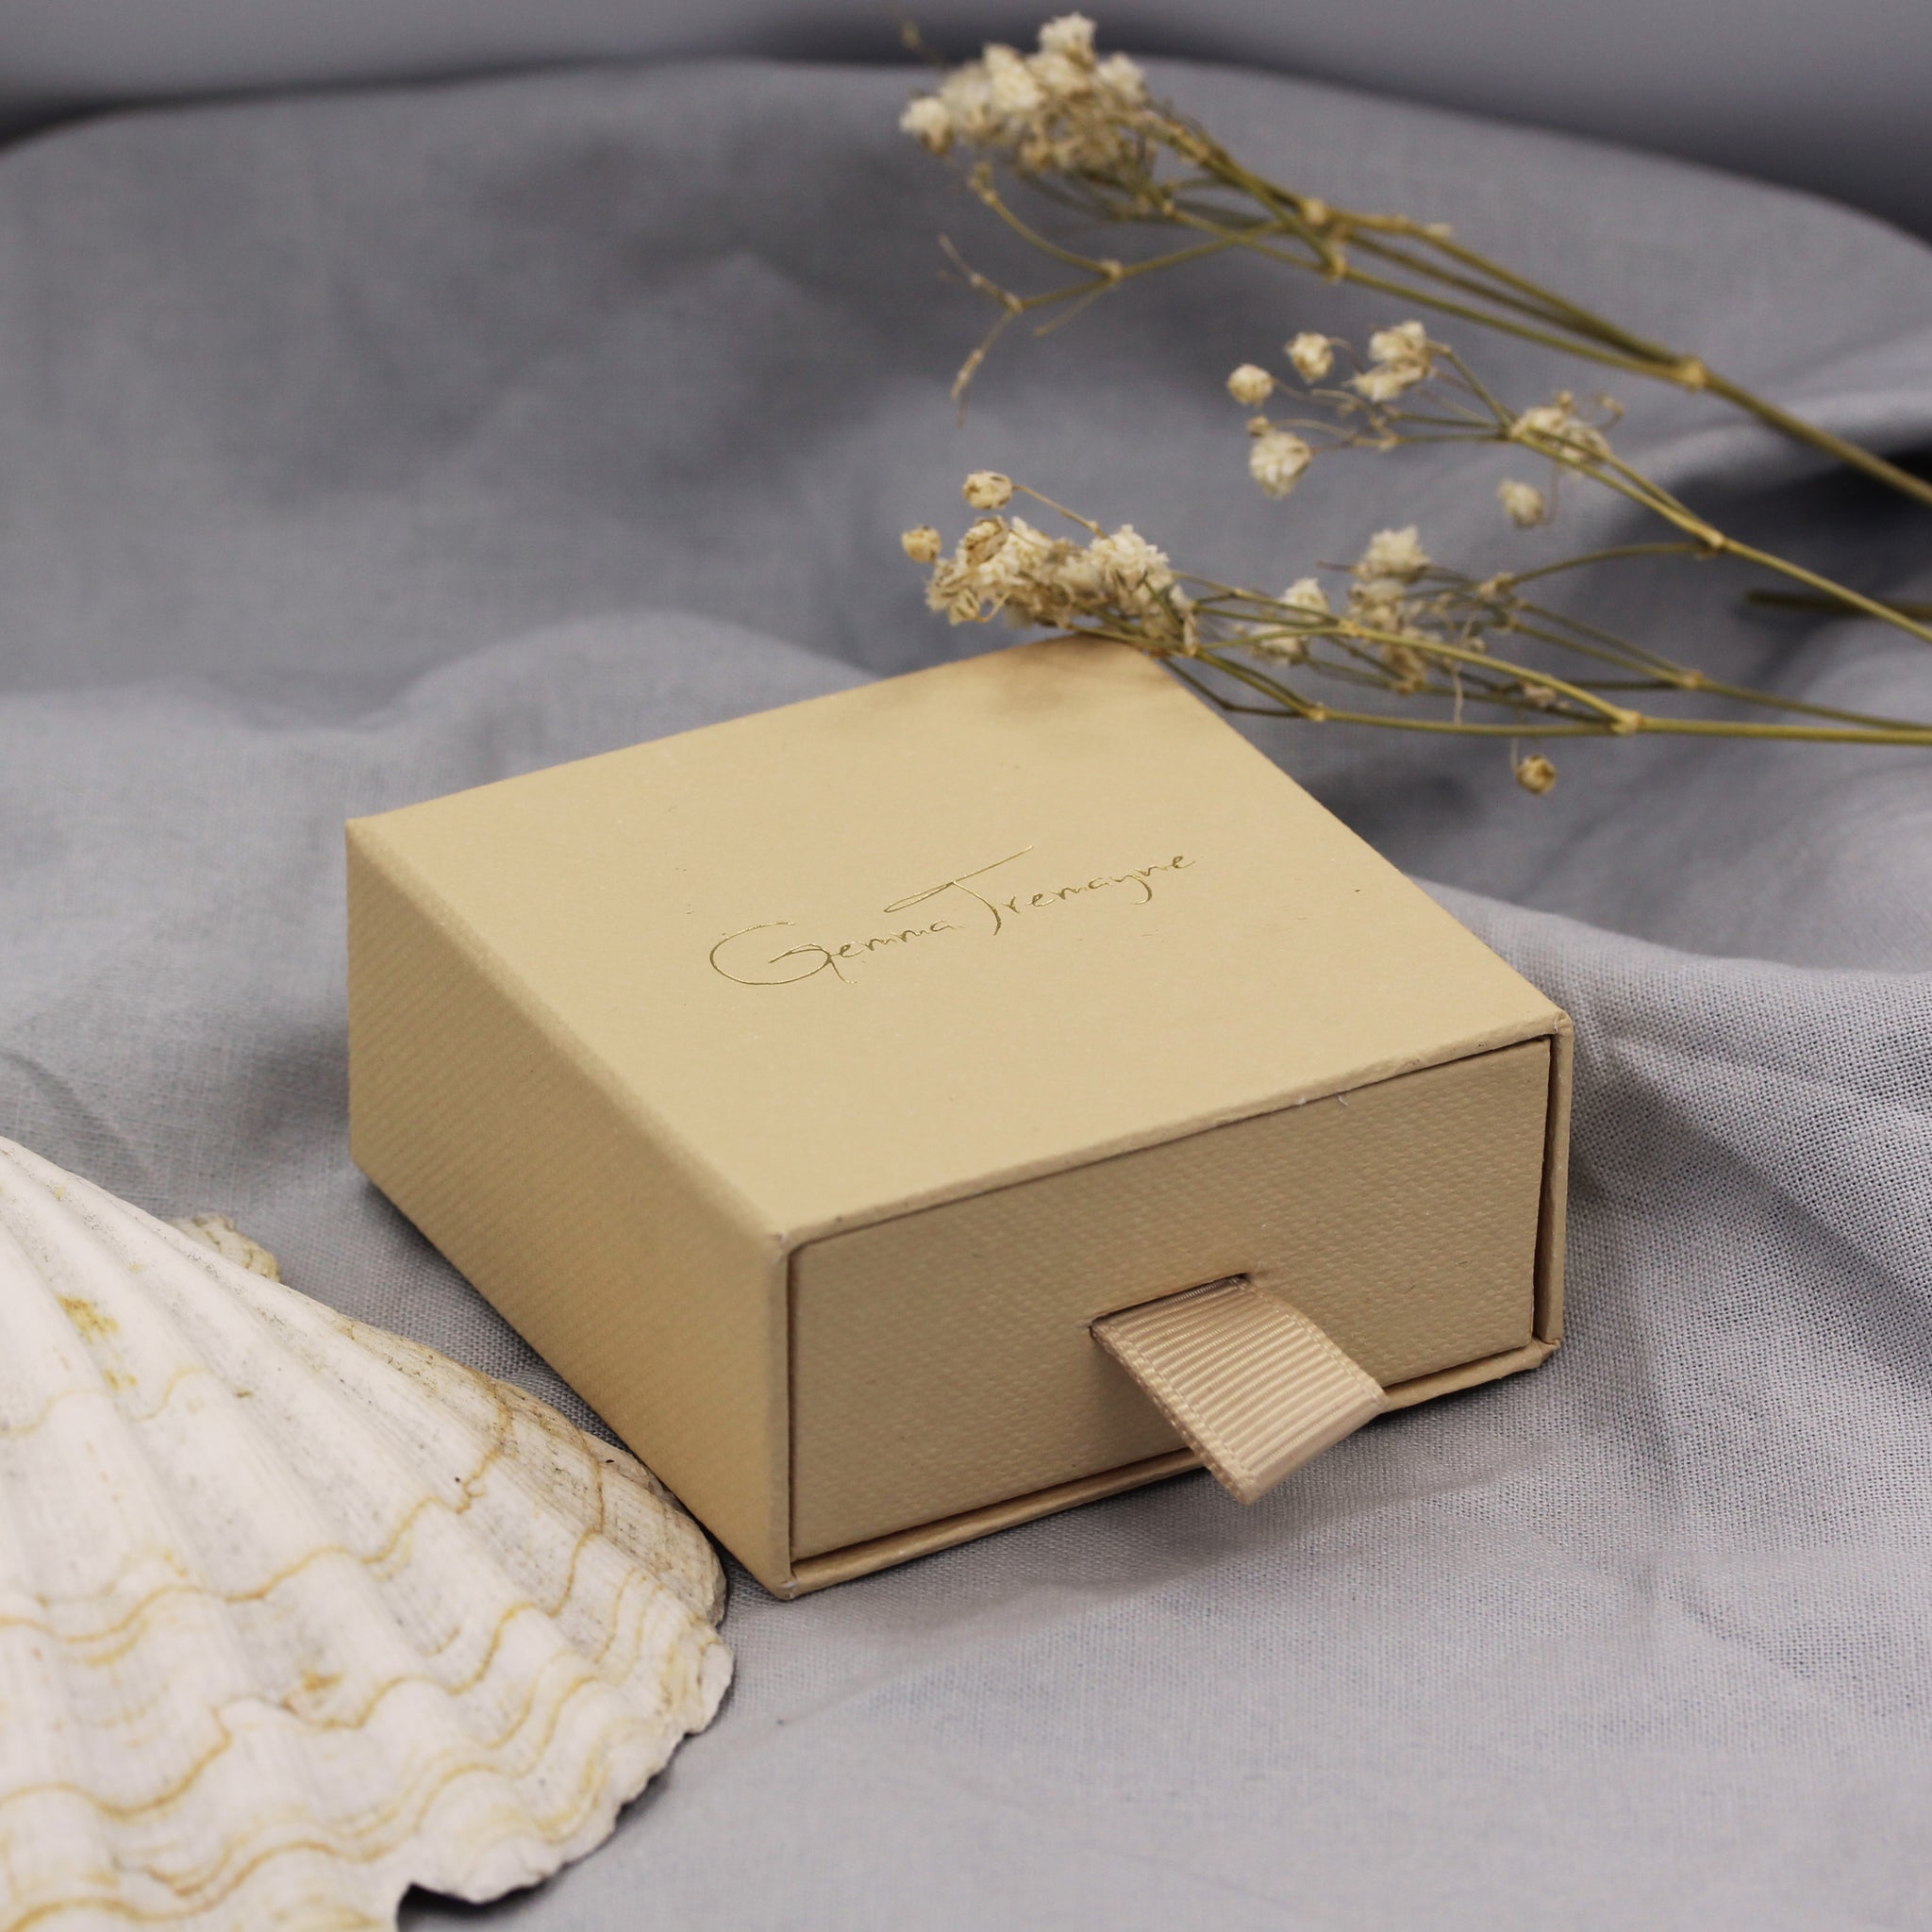 Eco conscious and FSC certified jewellery packaging by Gemma Tremayne Jewellery